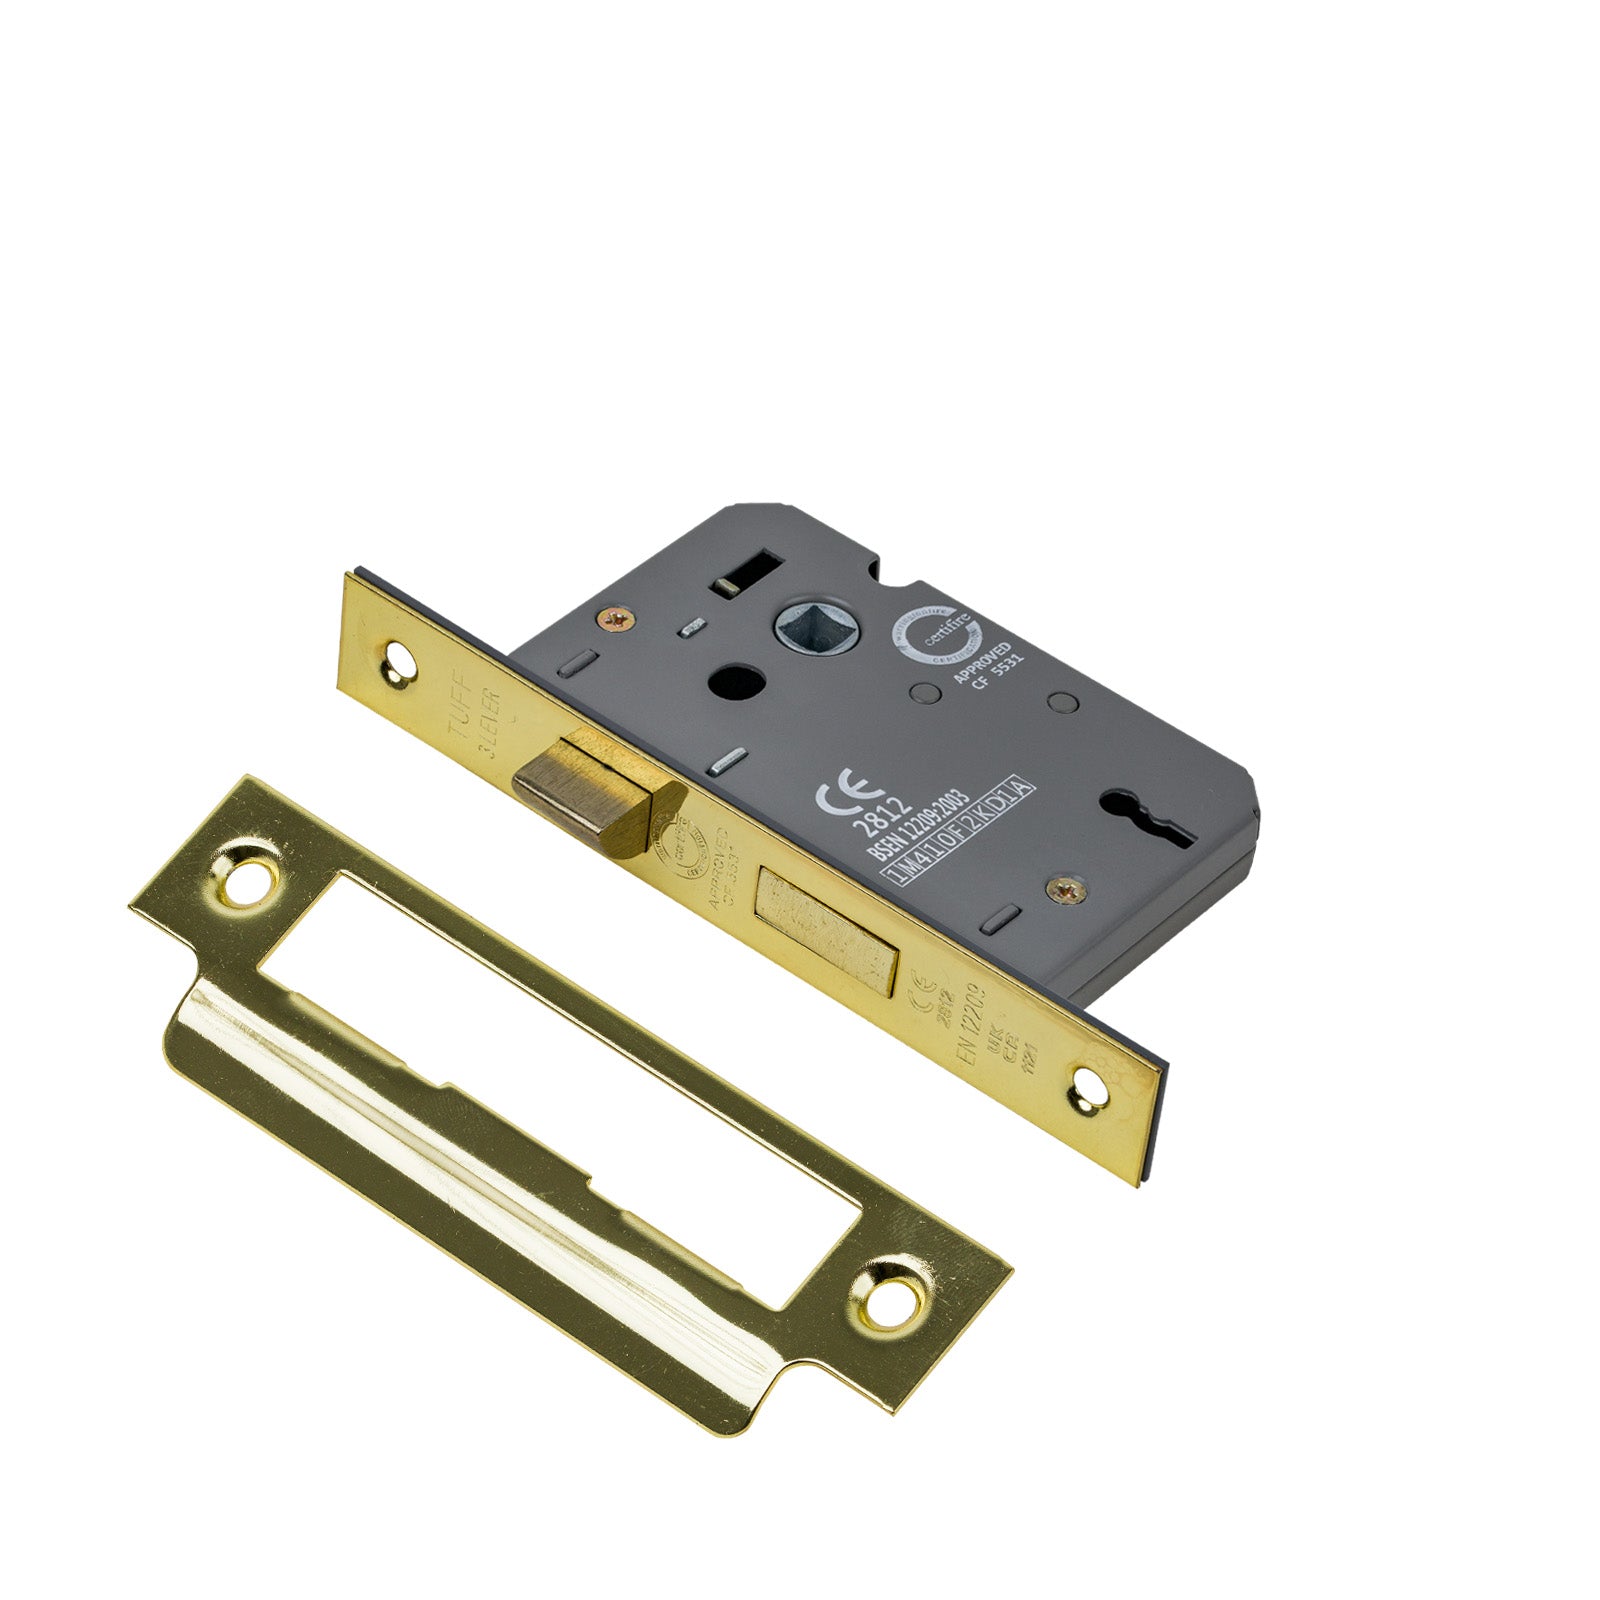 SHOW 3 Lever Sash Lock - 2.5 Inch with Polished brass finished forend and striker plate